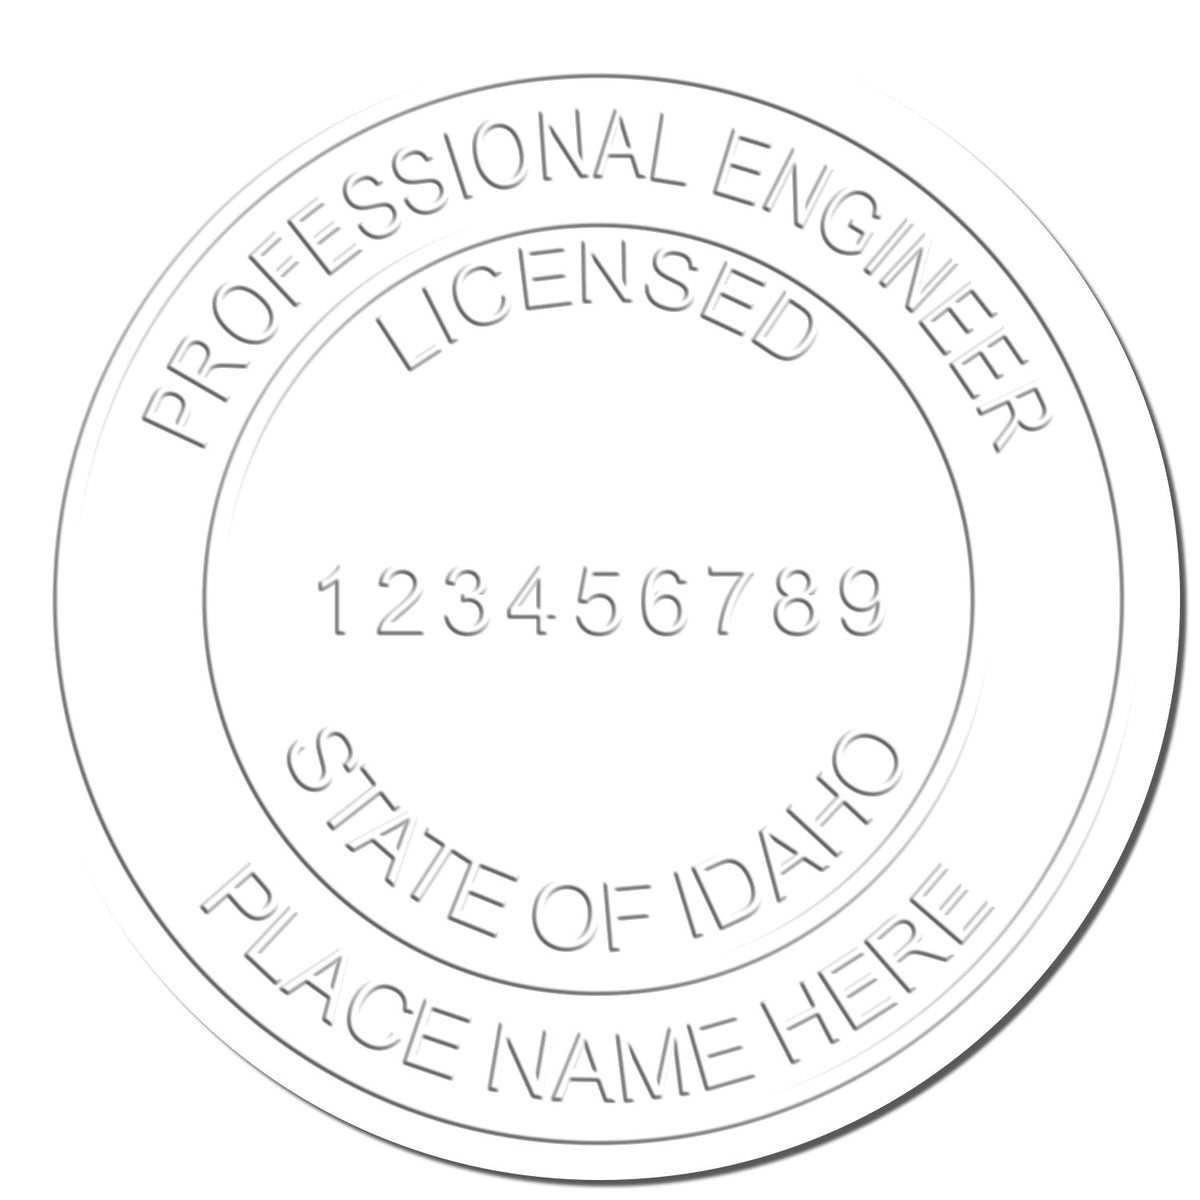 This paper is stamped with a sample imprint of the Heavy Duty Cast Iron Idaho Engineer Seal Embosser, signifying its quality and reliability.